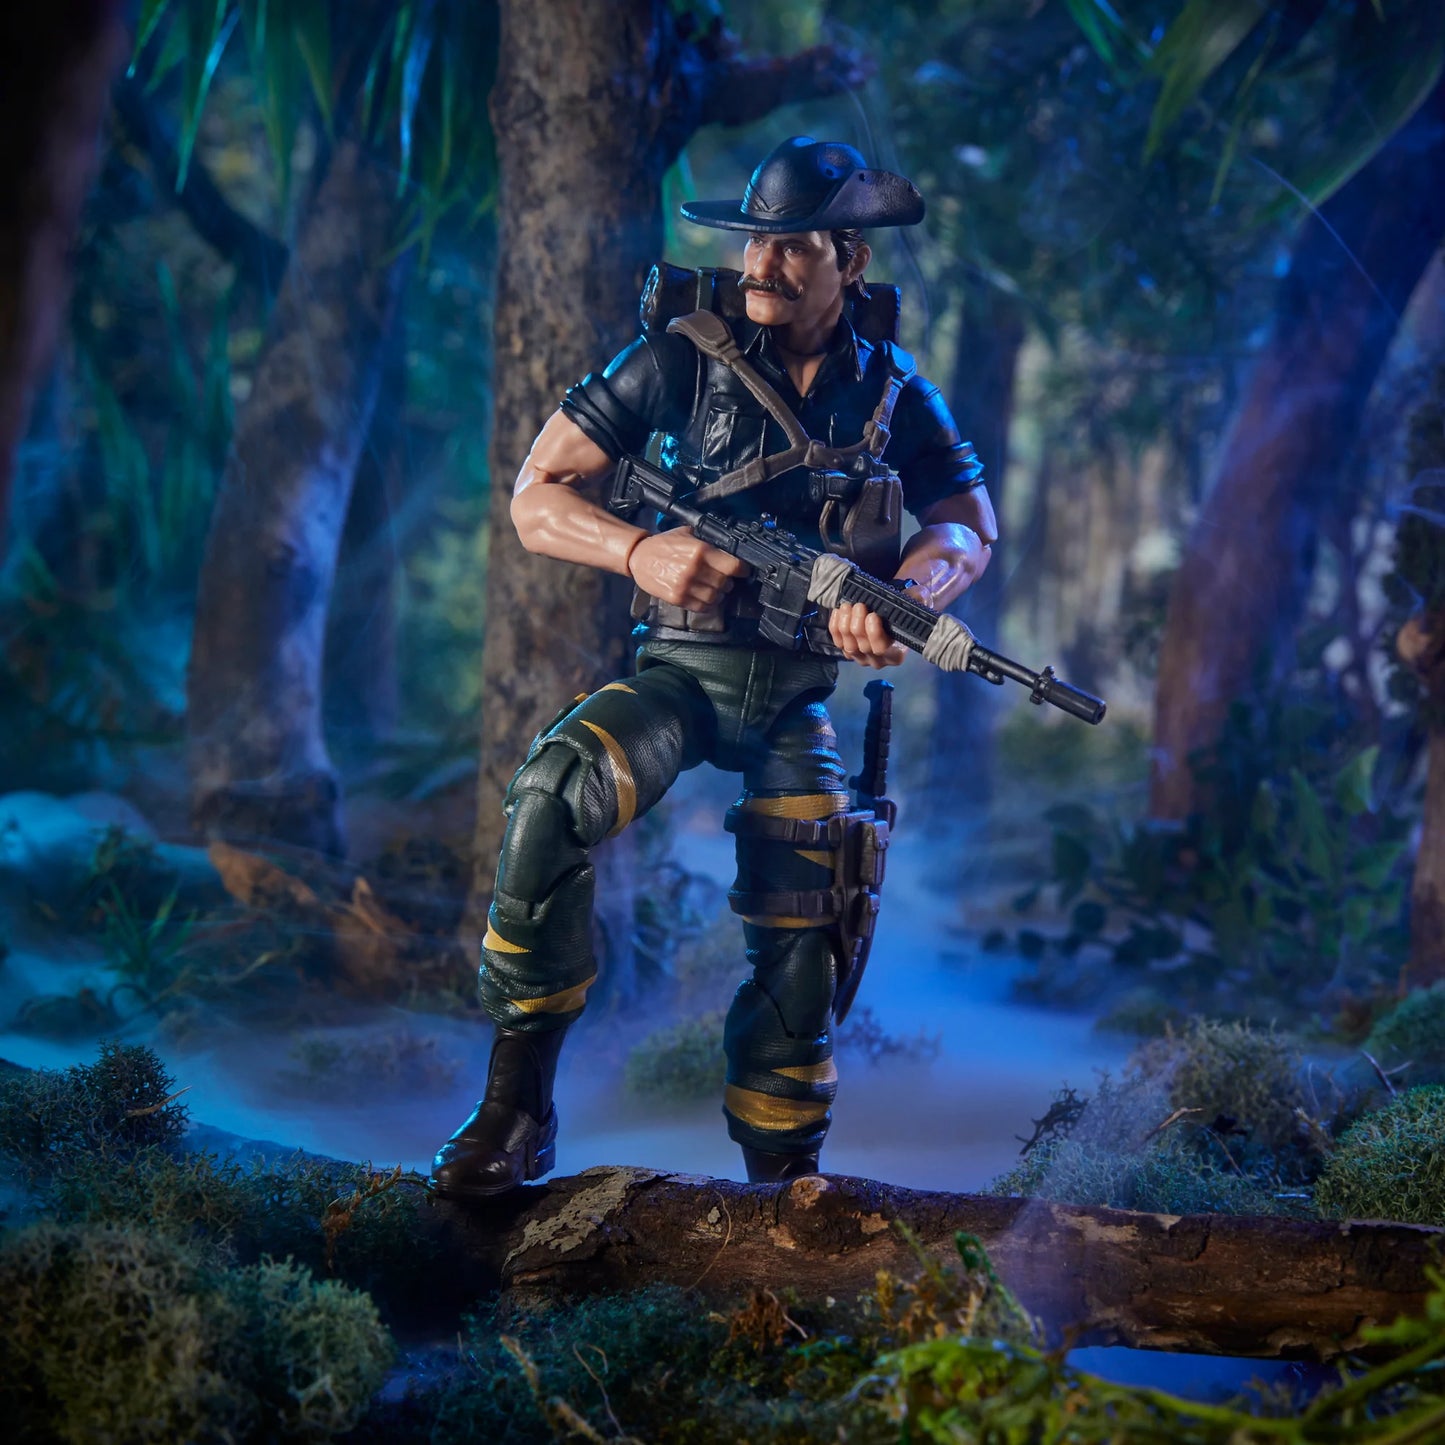 G.I. Joe Classified Series Tiger Force Recondo Action Figure